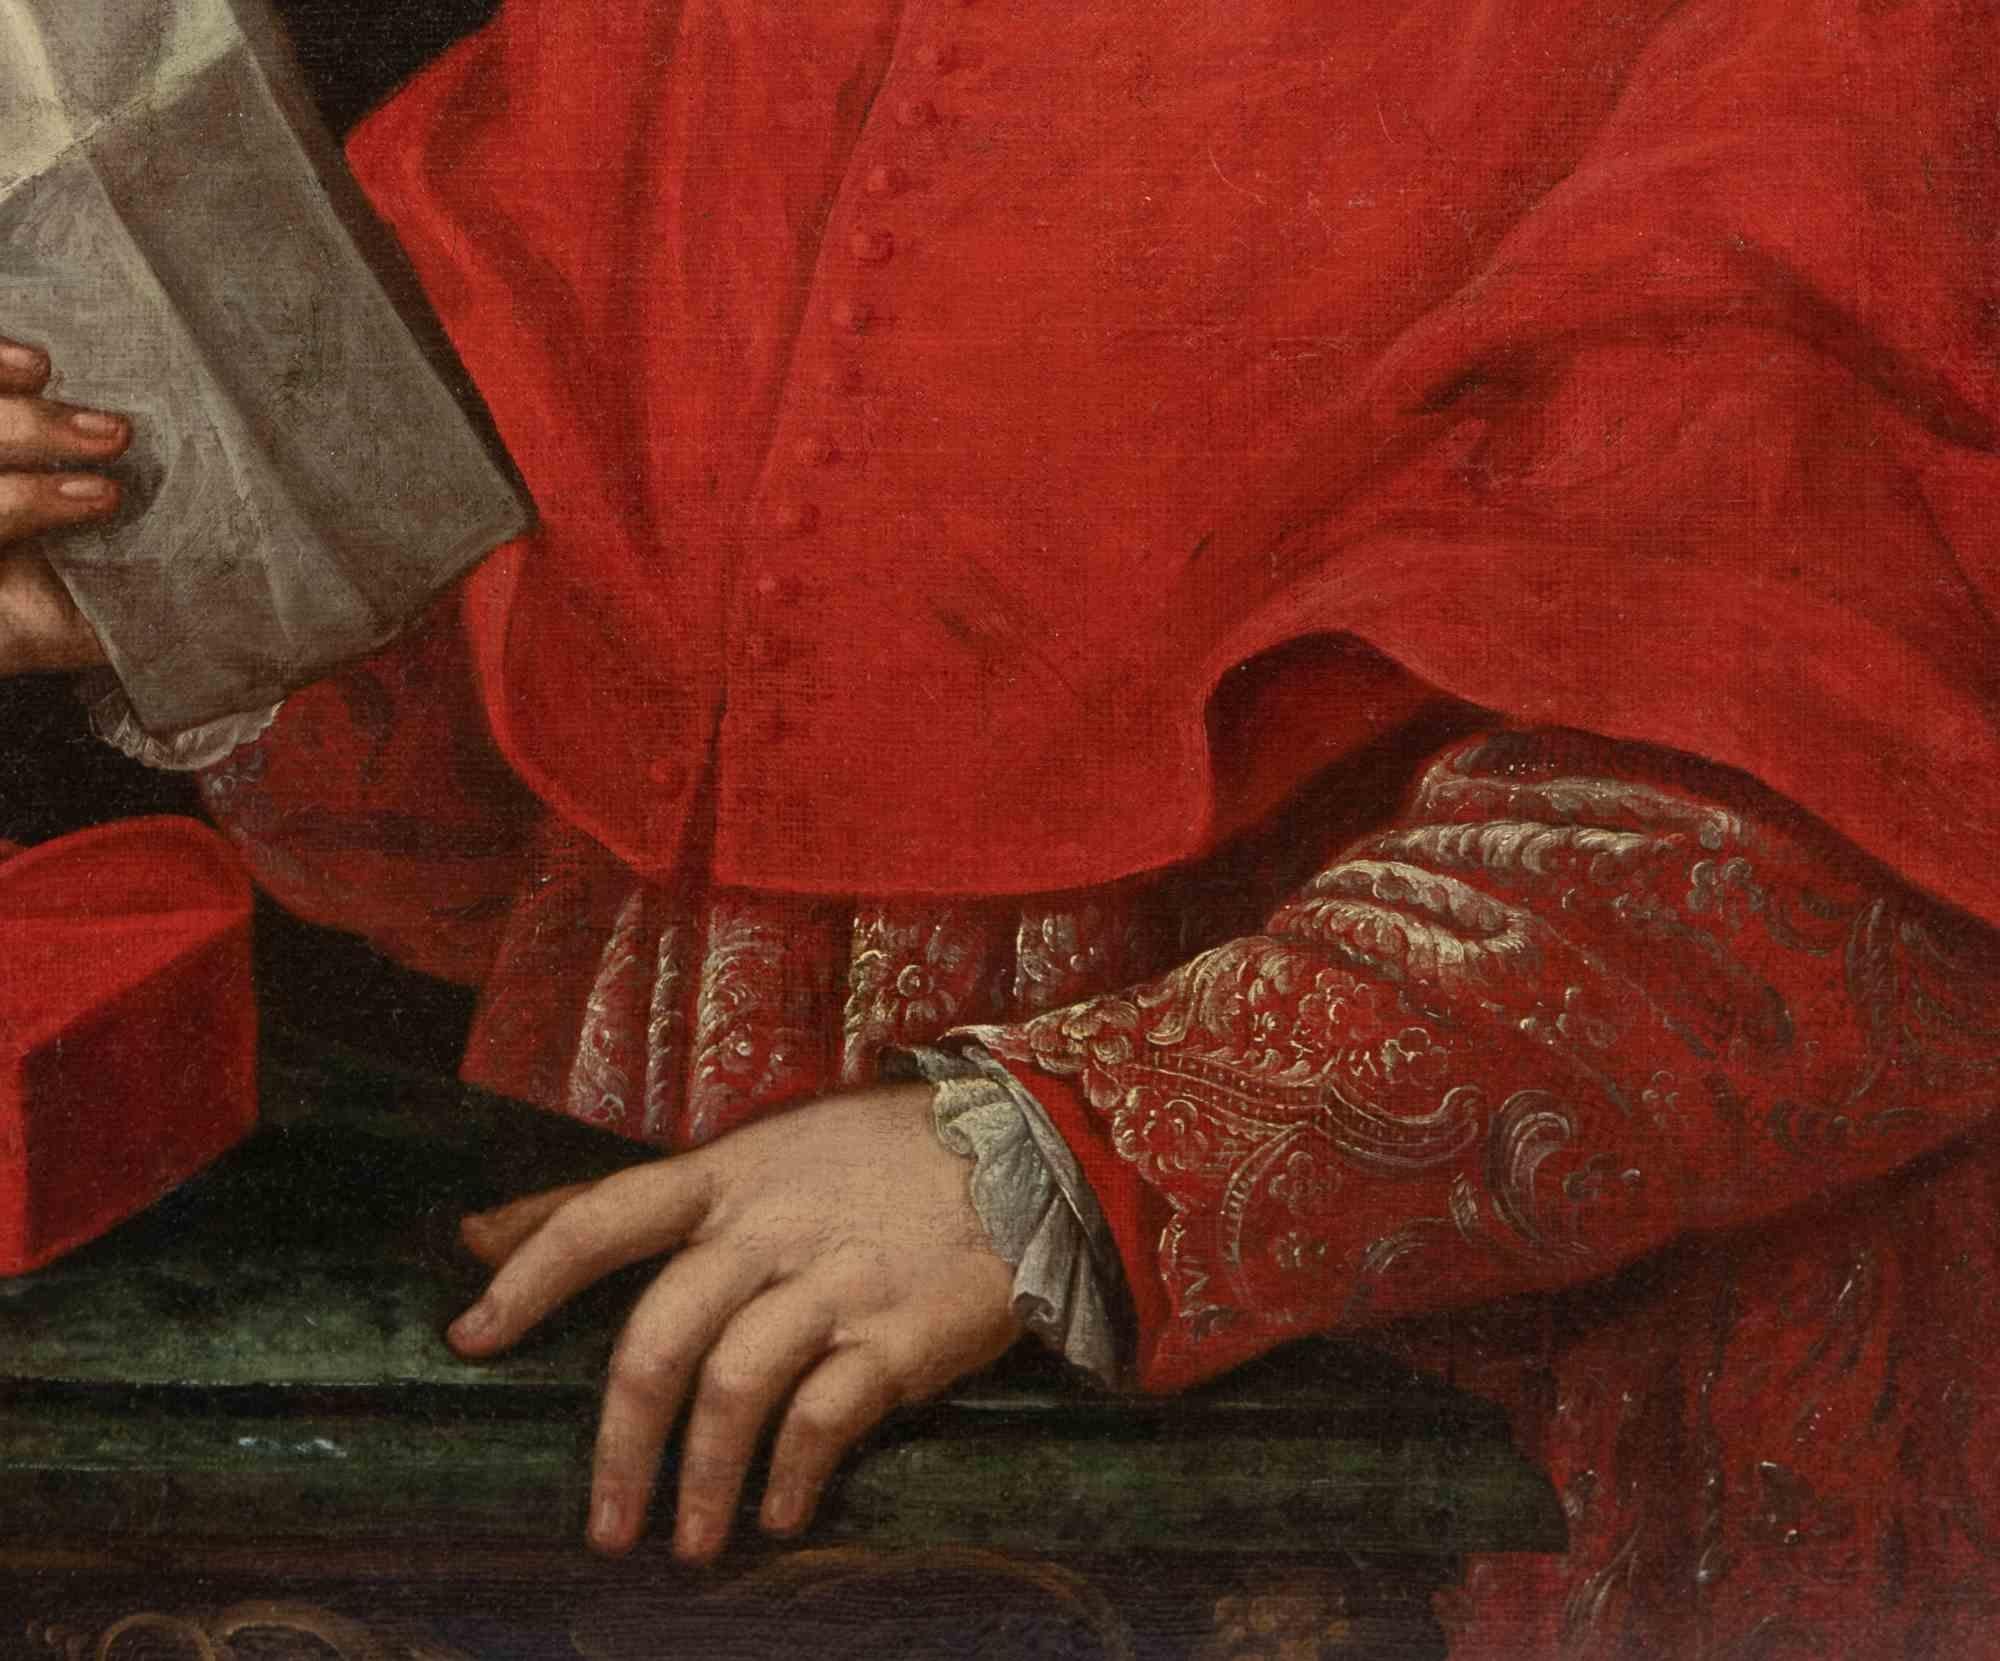 Cardinal with missive is an original old master artwork realized in the 17th Century.

Mixed colored oil painting on canvas. Provenance: Italy.  Avery precoius artwork depicting a cardinal. 

The pictorial rendering of the fabric of the dress makes